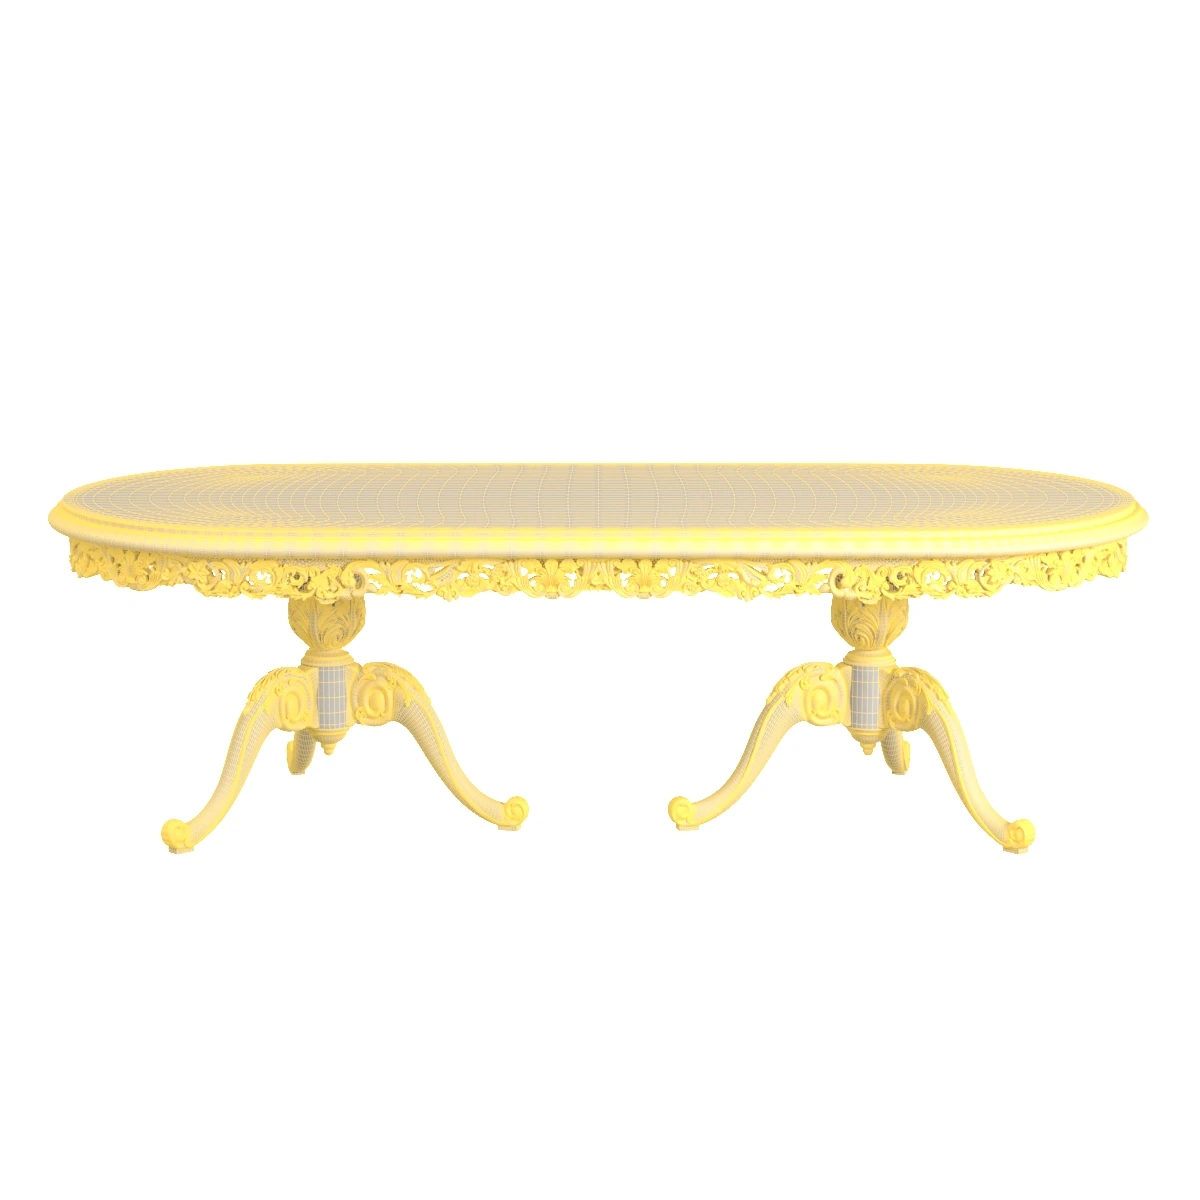 Italian Gilt Carved Inlaid Gray Dining Table 3D Model_07